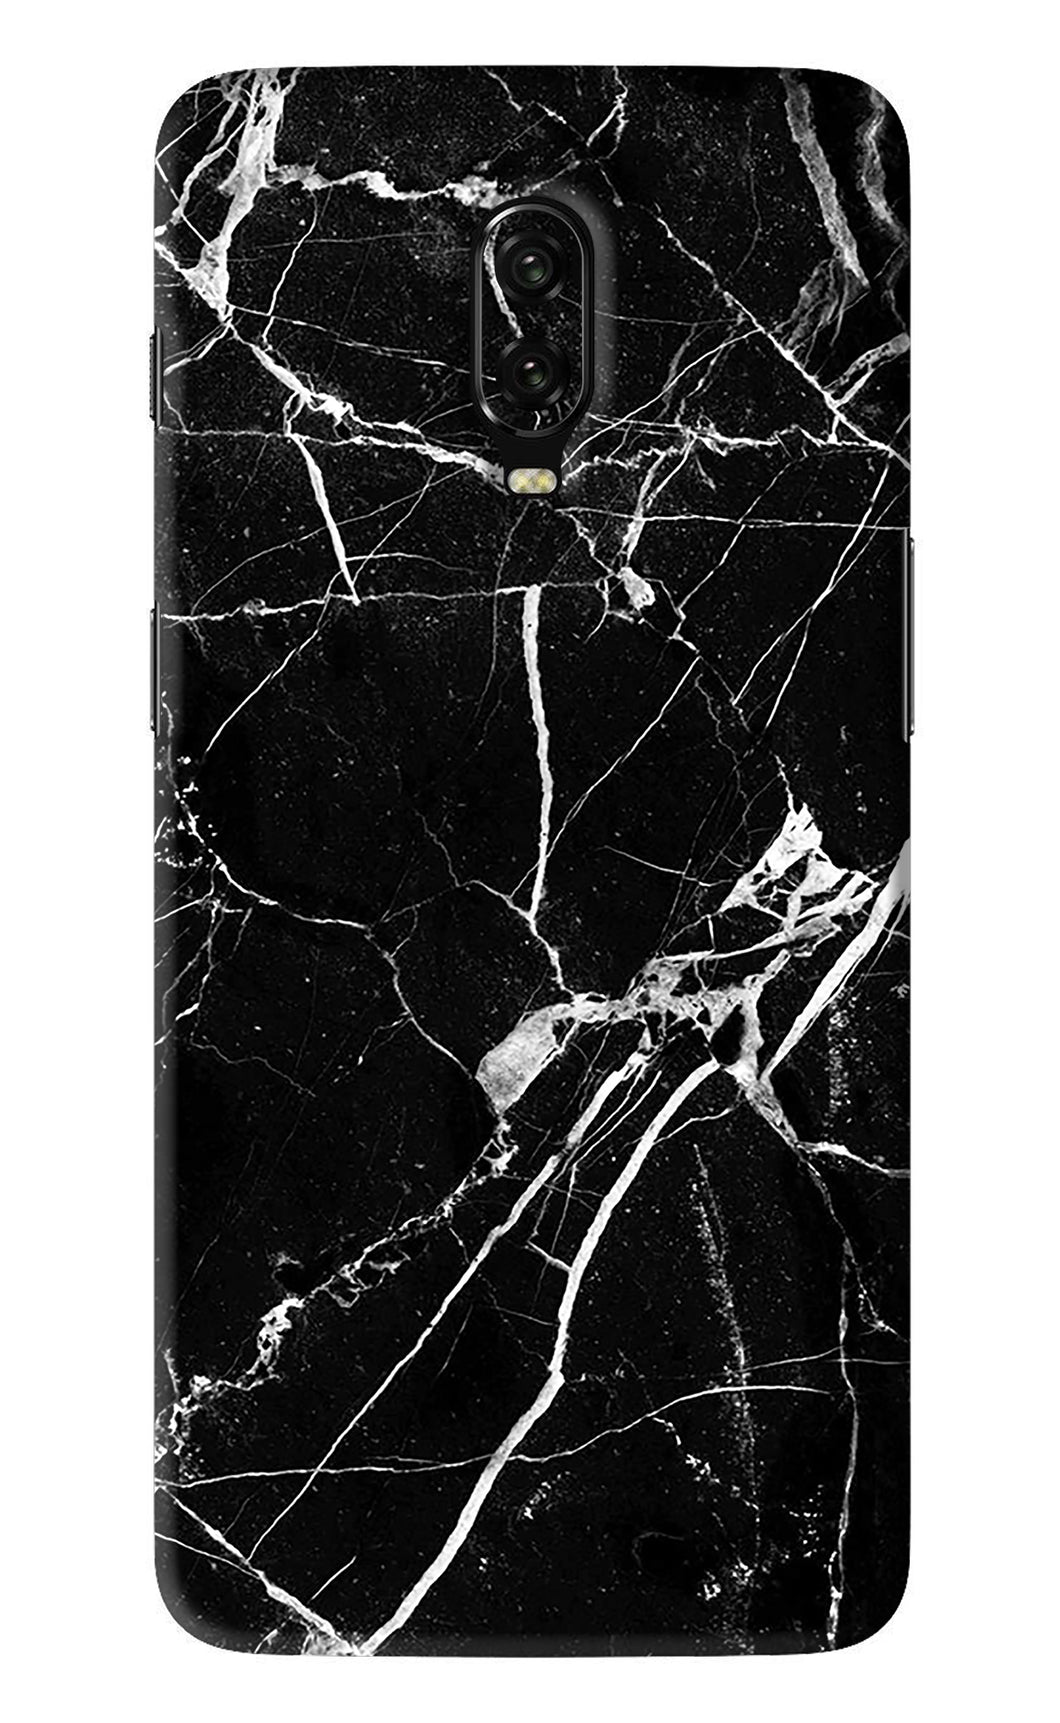 Black Marble Texture 2 OnePlus 6T Back Skin Wrap